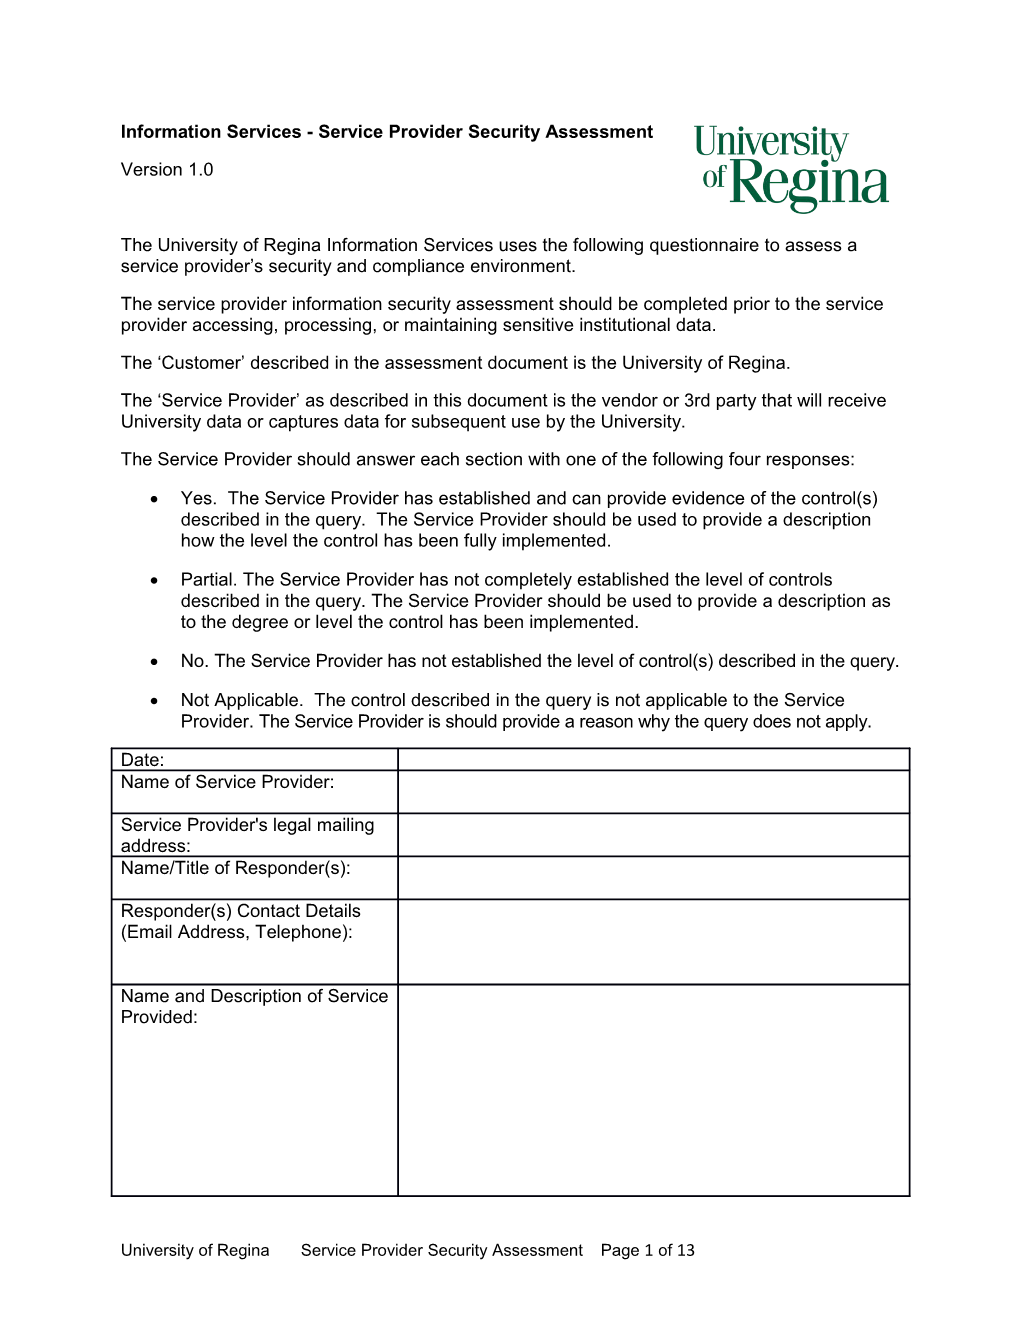 The Customer Described in the Assessment Document Is the University of Regina